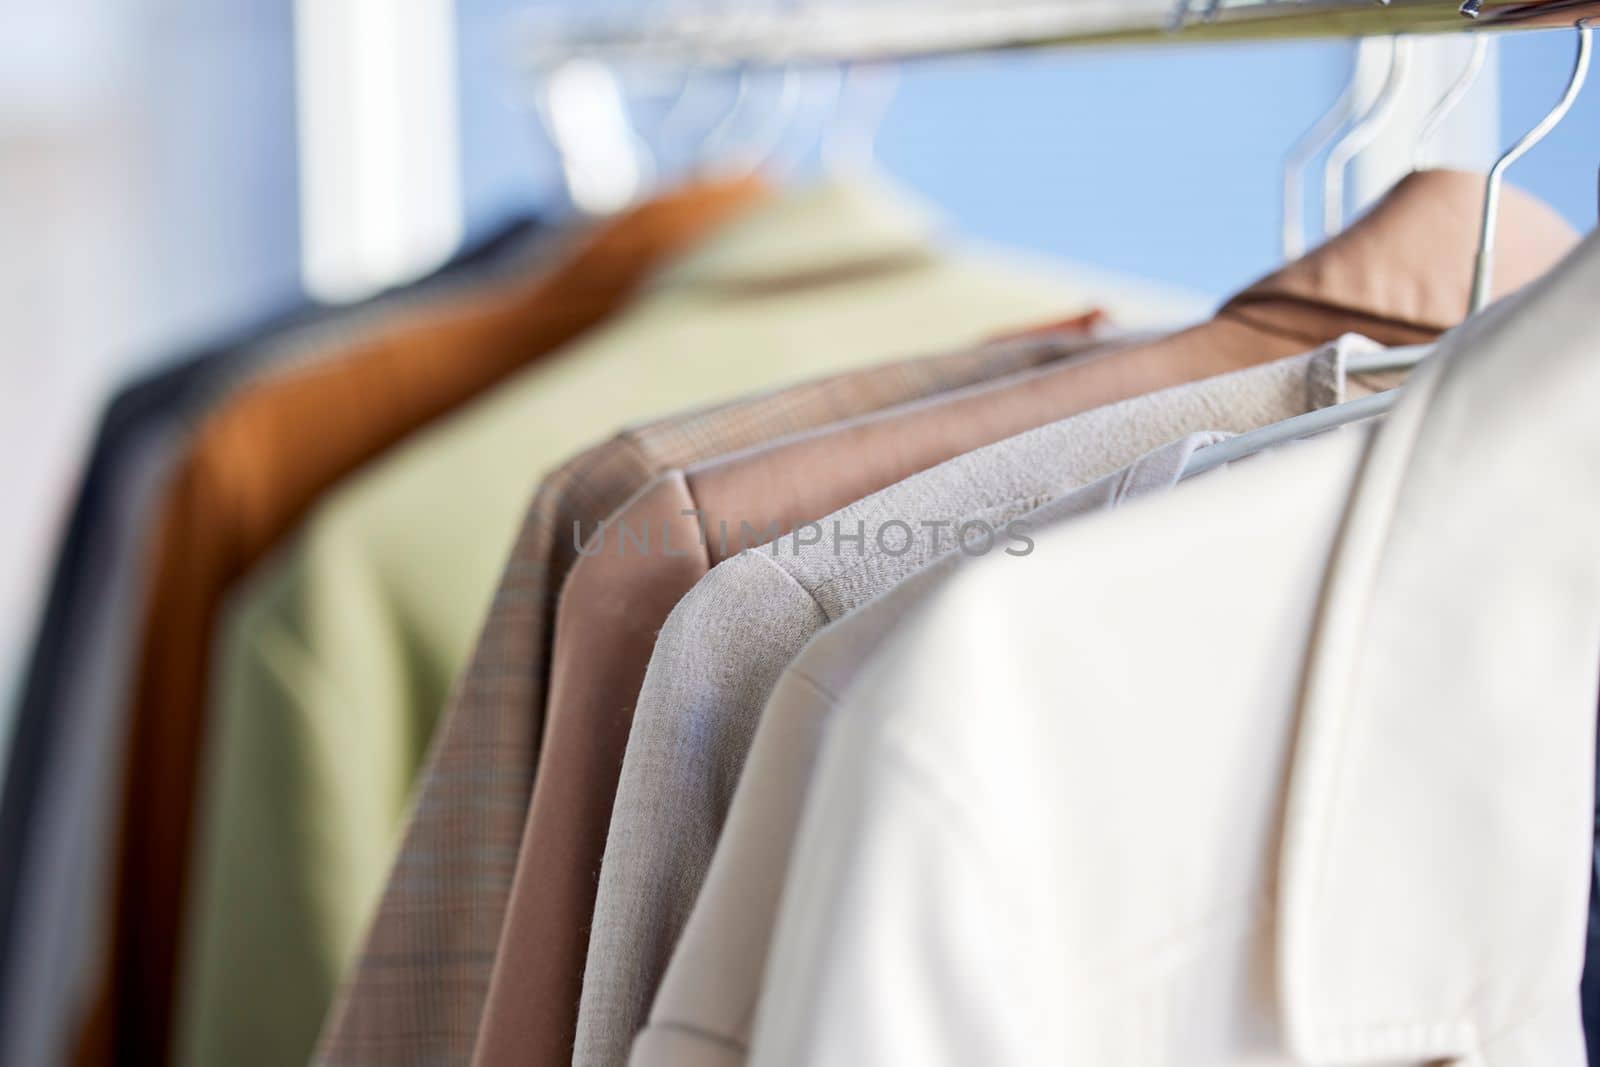 Shirts, clothes and closet in a home with fashion, style and organized. Neat, tidy and clean work clothing in a wardrobe for lifestyle, selection and choice in a bedroom for organizing and changing.